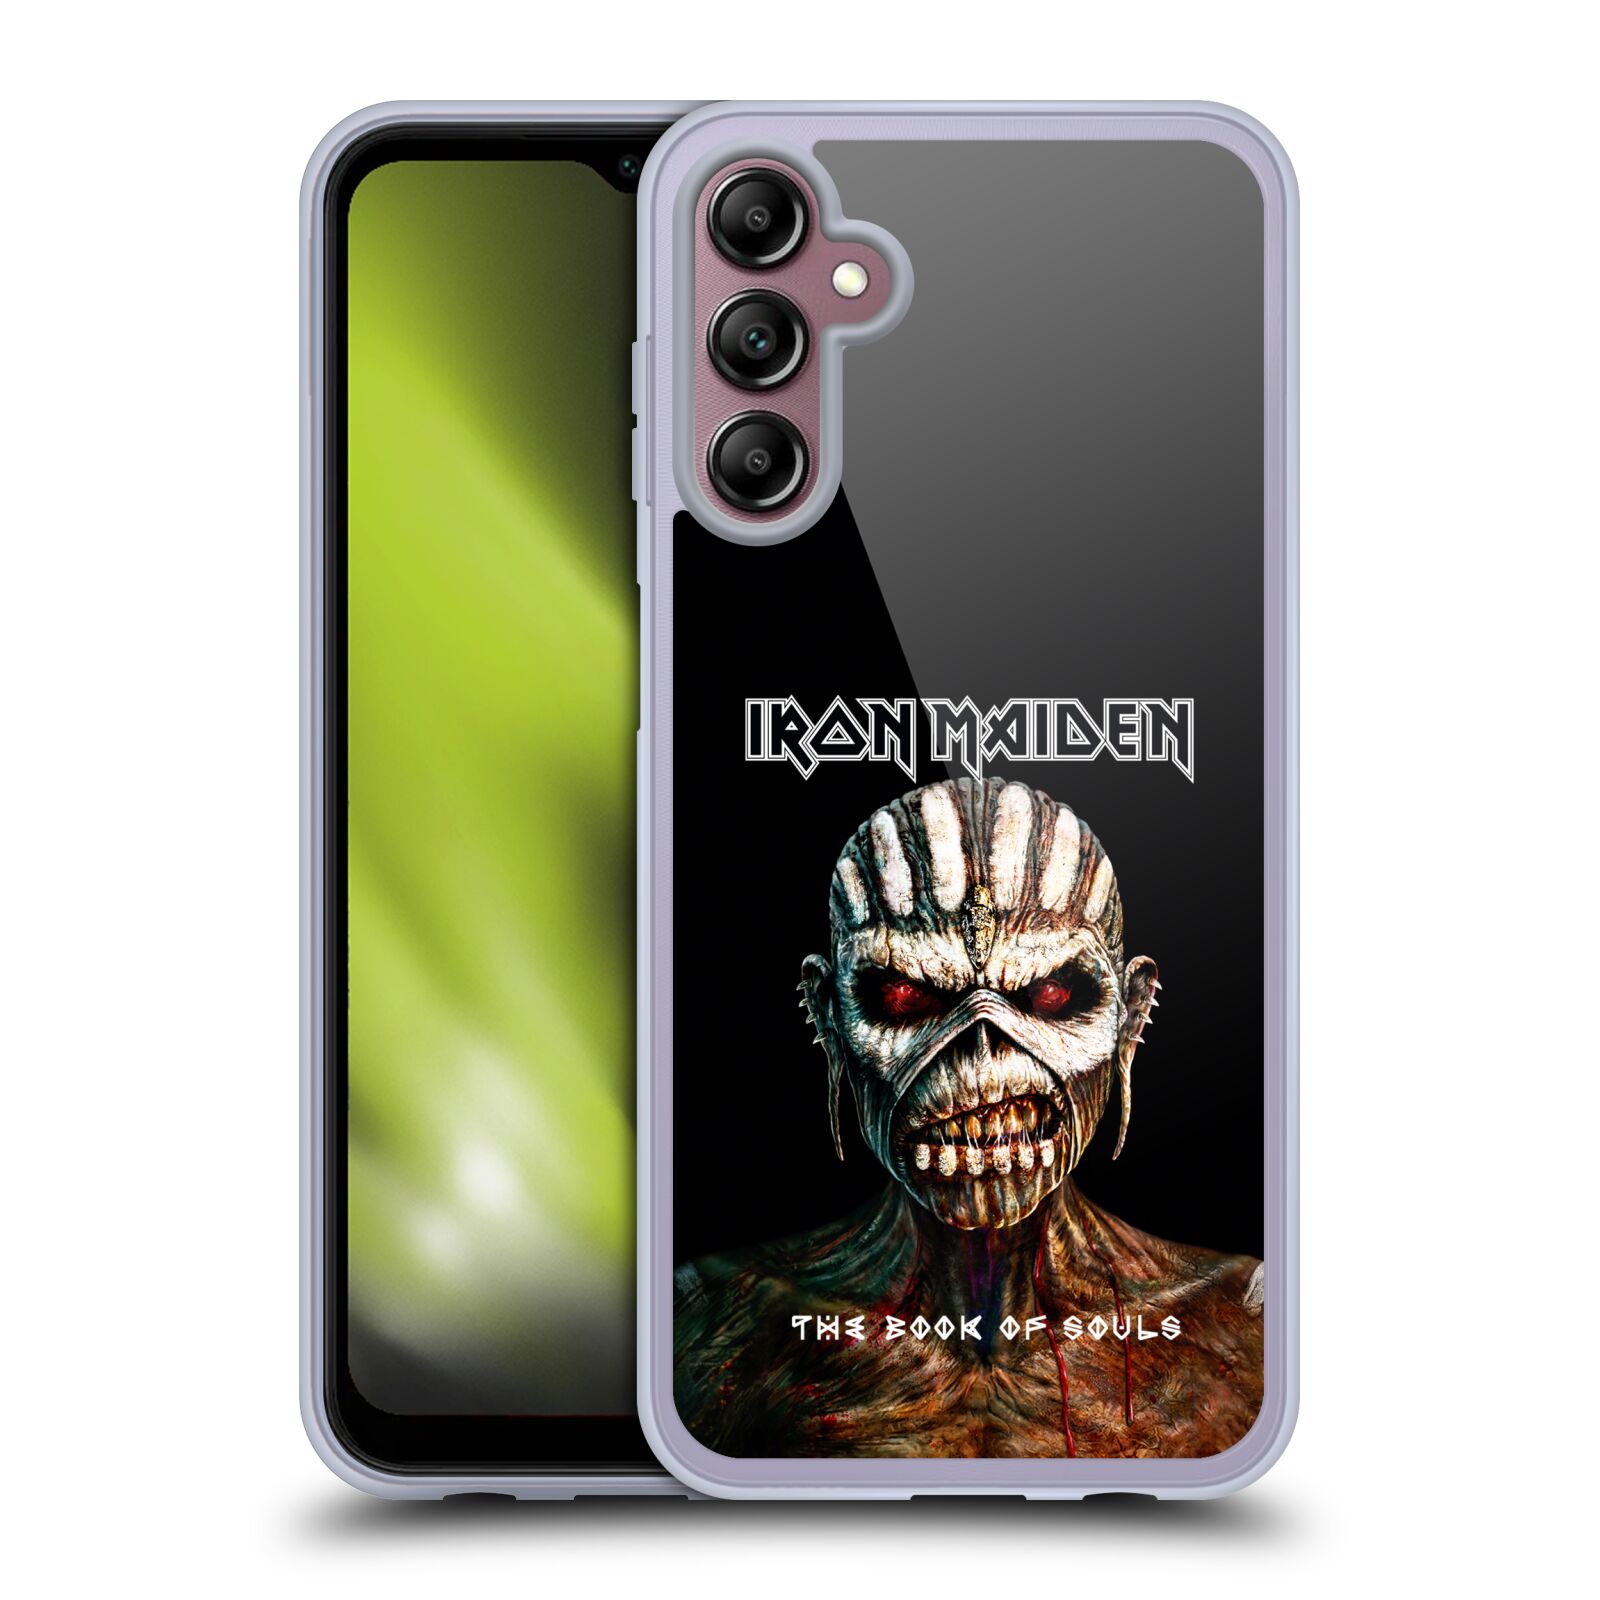 Silikonové pouzdro na mobil Samsung Galaxy A14 5G / LTE - Head Case - Iron Maiden - The Book Of Souls (Silikonový kryt, obal, pouzdro na mobilní telefon Samsung Galaxy A14 5G / LTE s motivem Iron Maiden - The Book Of Souls)